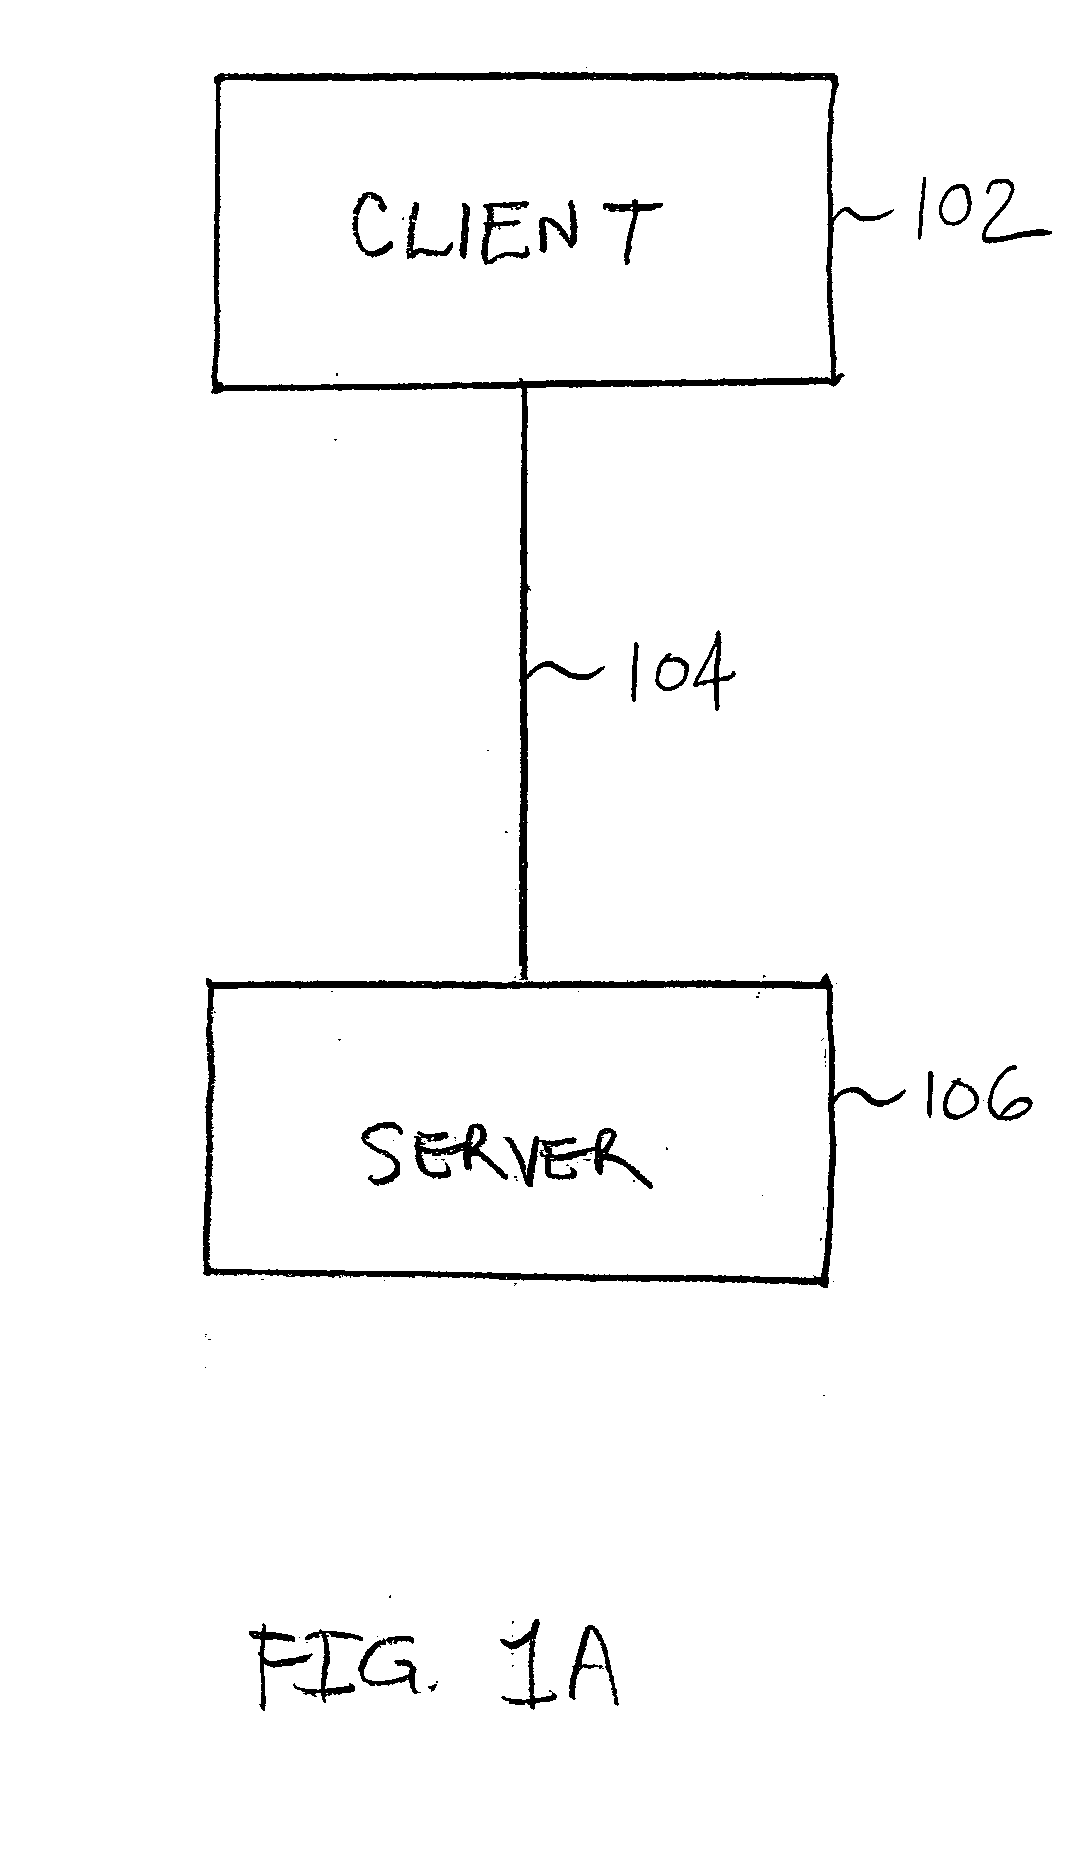 Metric-based monitoring and control of a limited resource